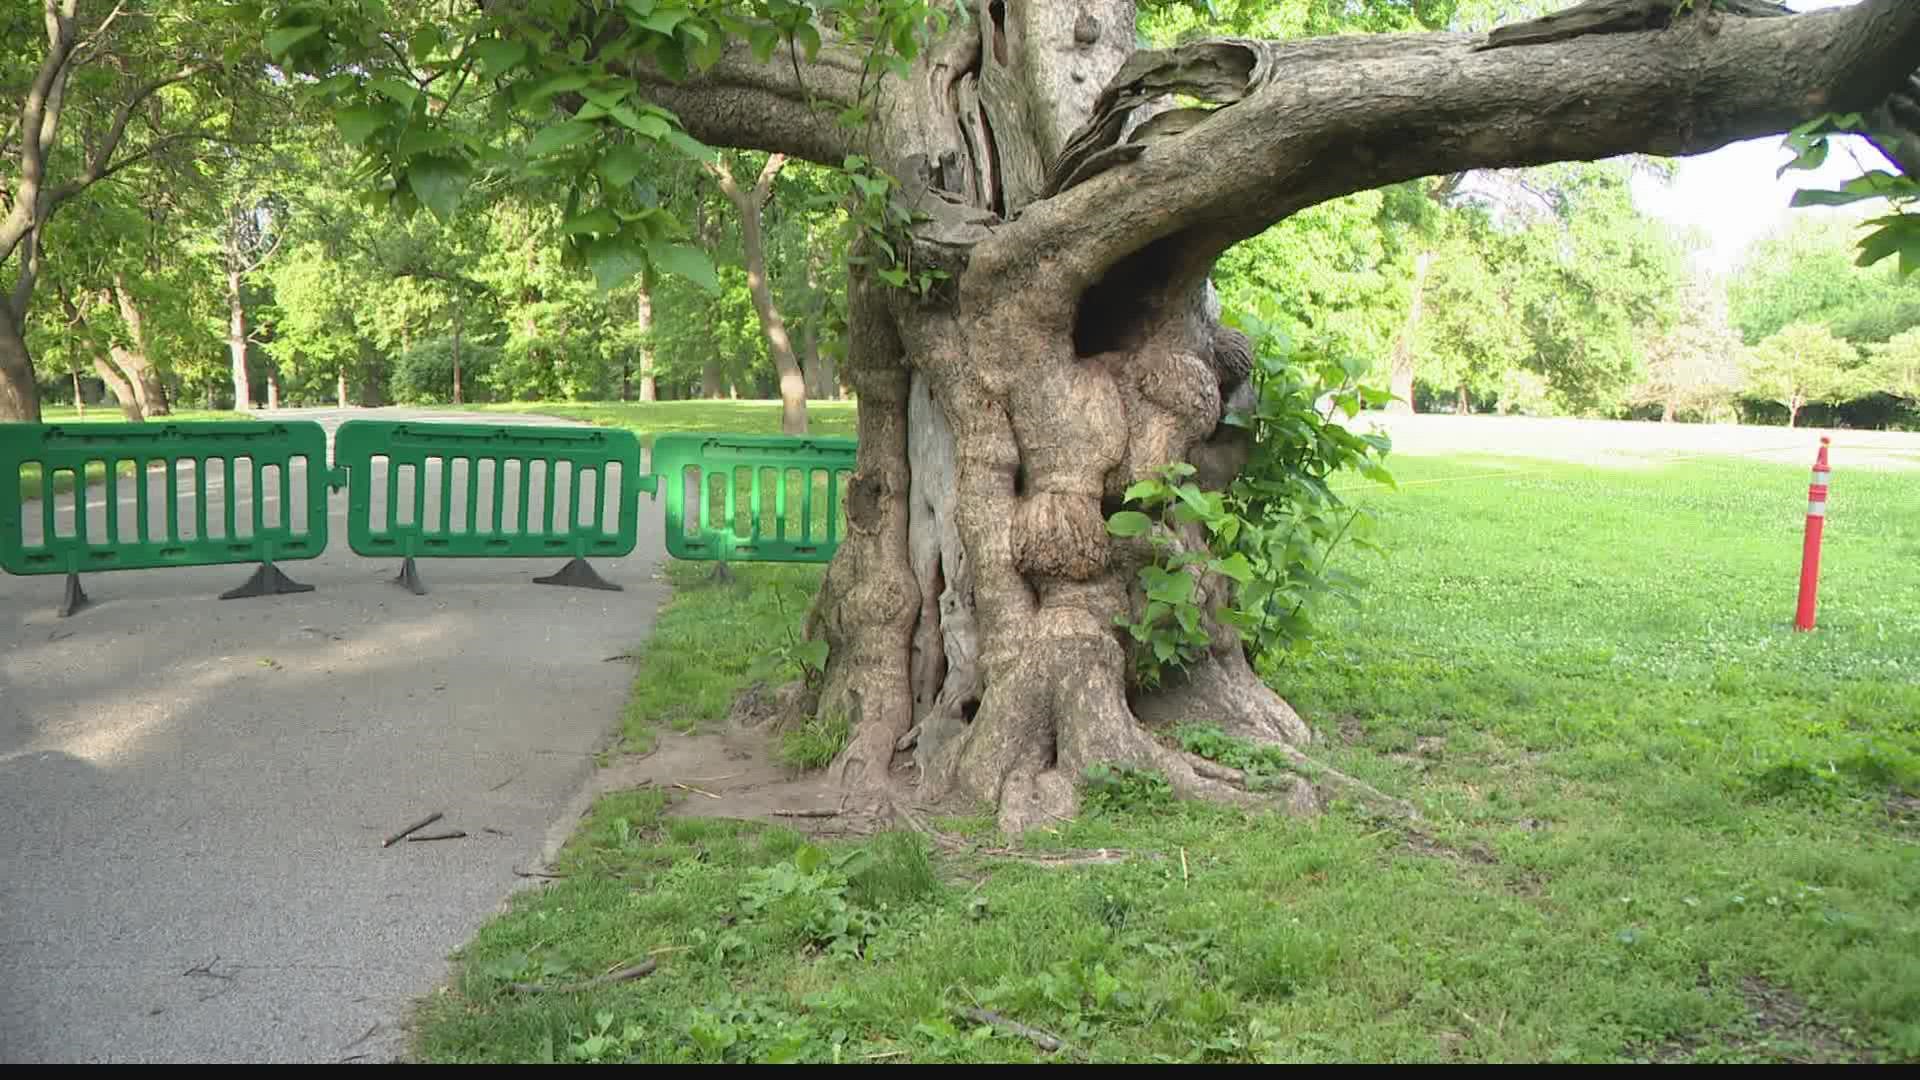 Officials estimate the 75- to 100-year-old tree is posing an increased risk of limbs falling without warning.